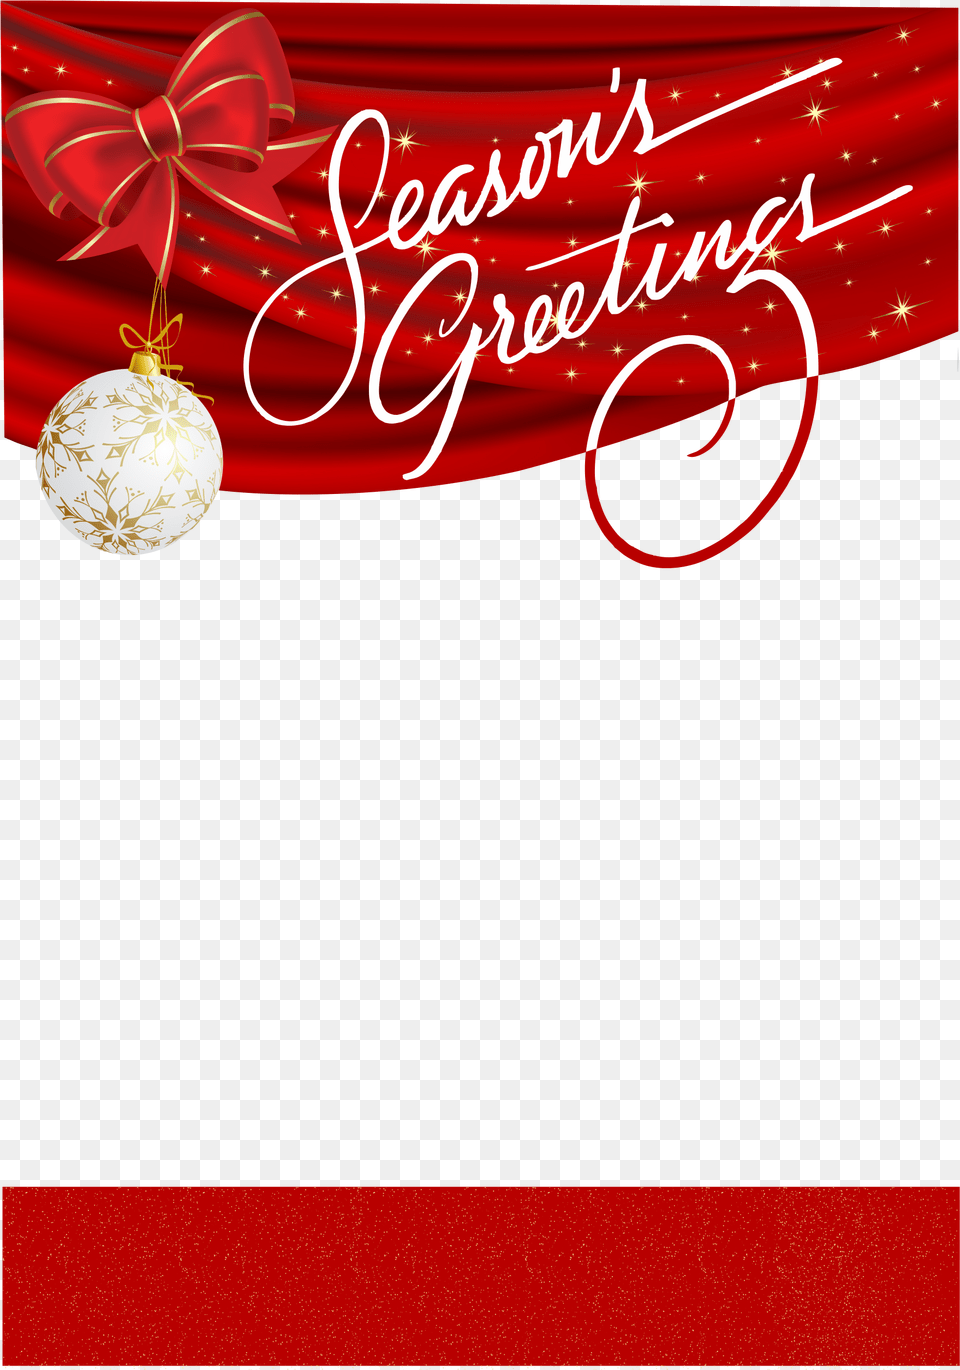 Transparent Congratulations Frame Season Greetings Photo Frames, Envelope, Greeting Card, Mail, Accessories Png Image